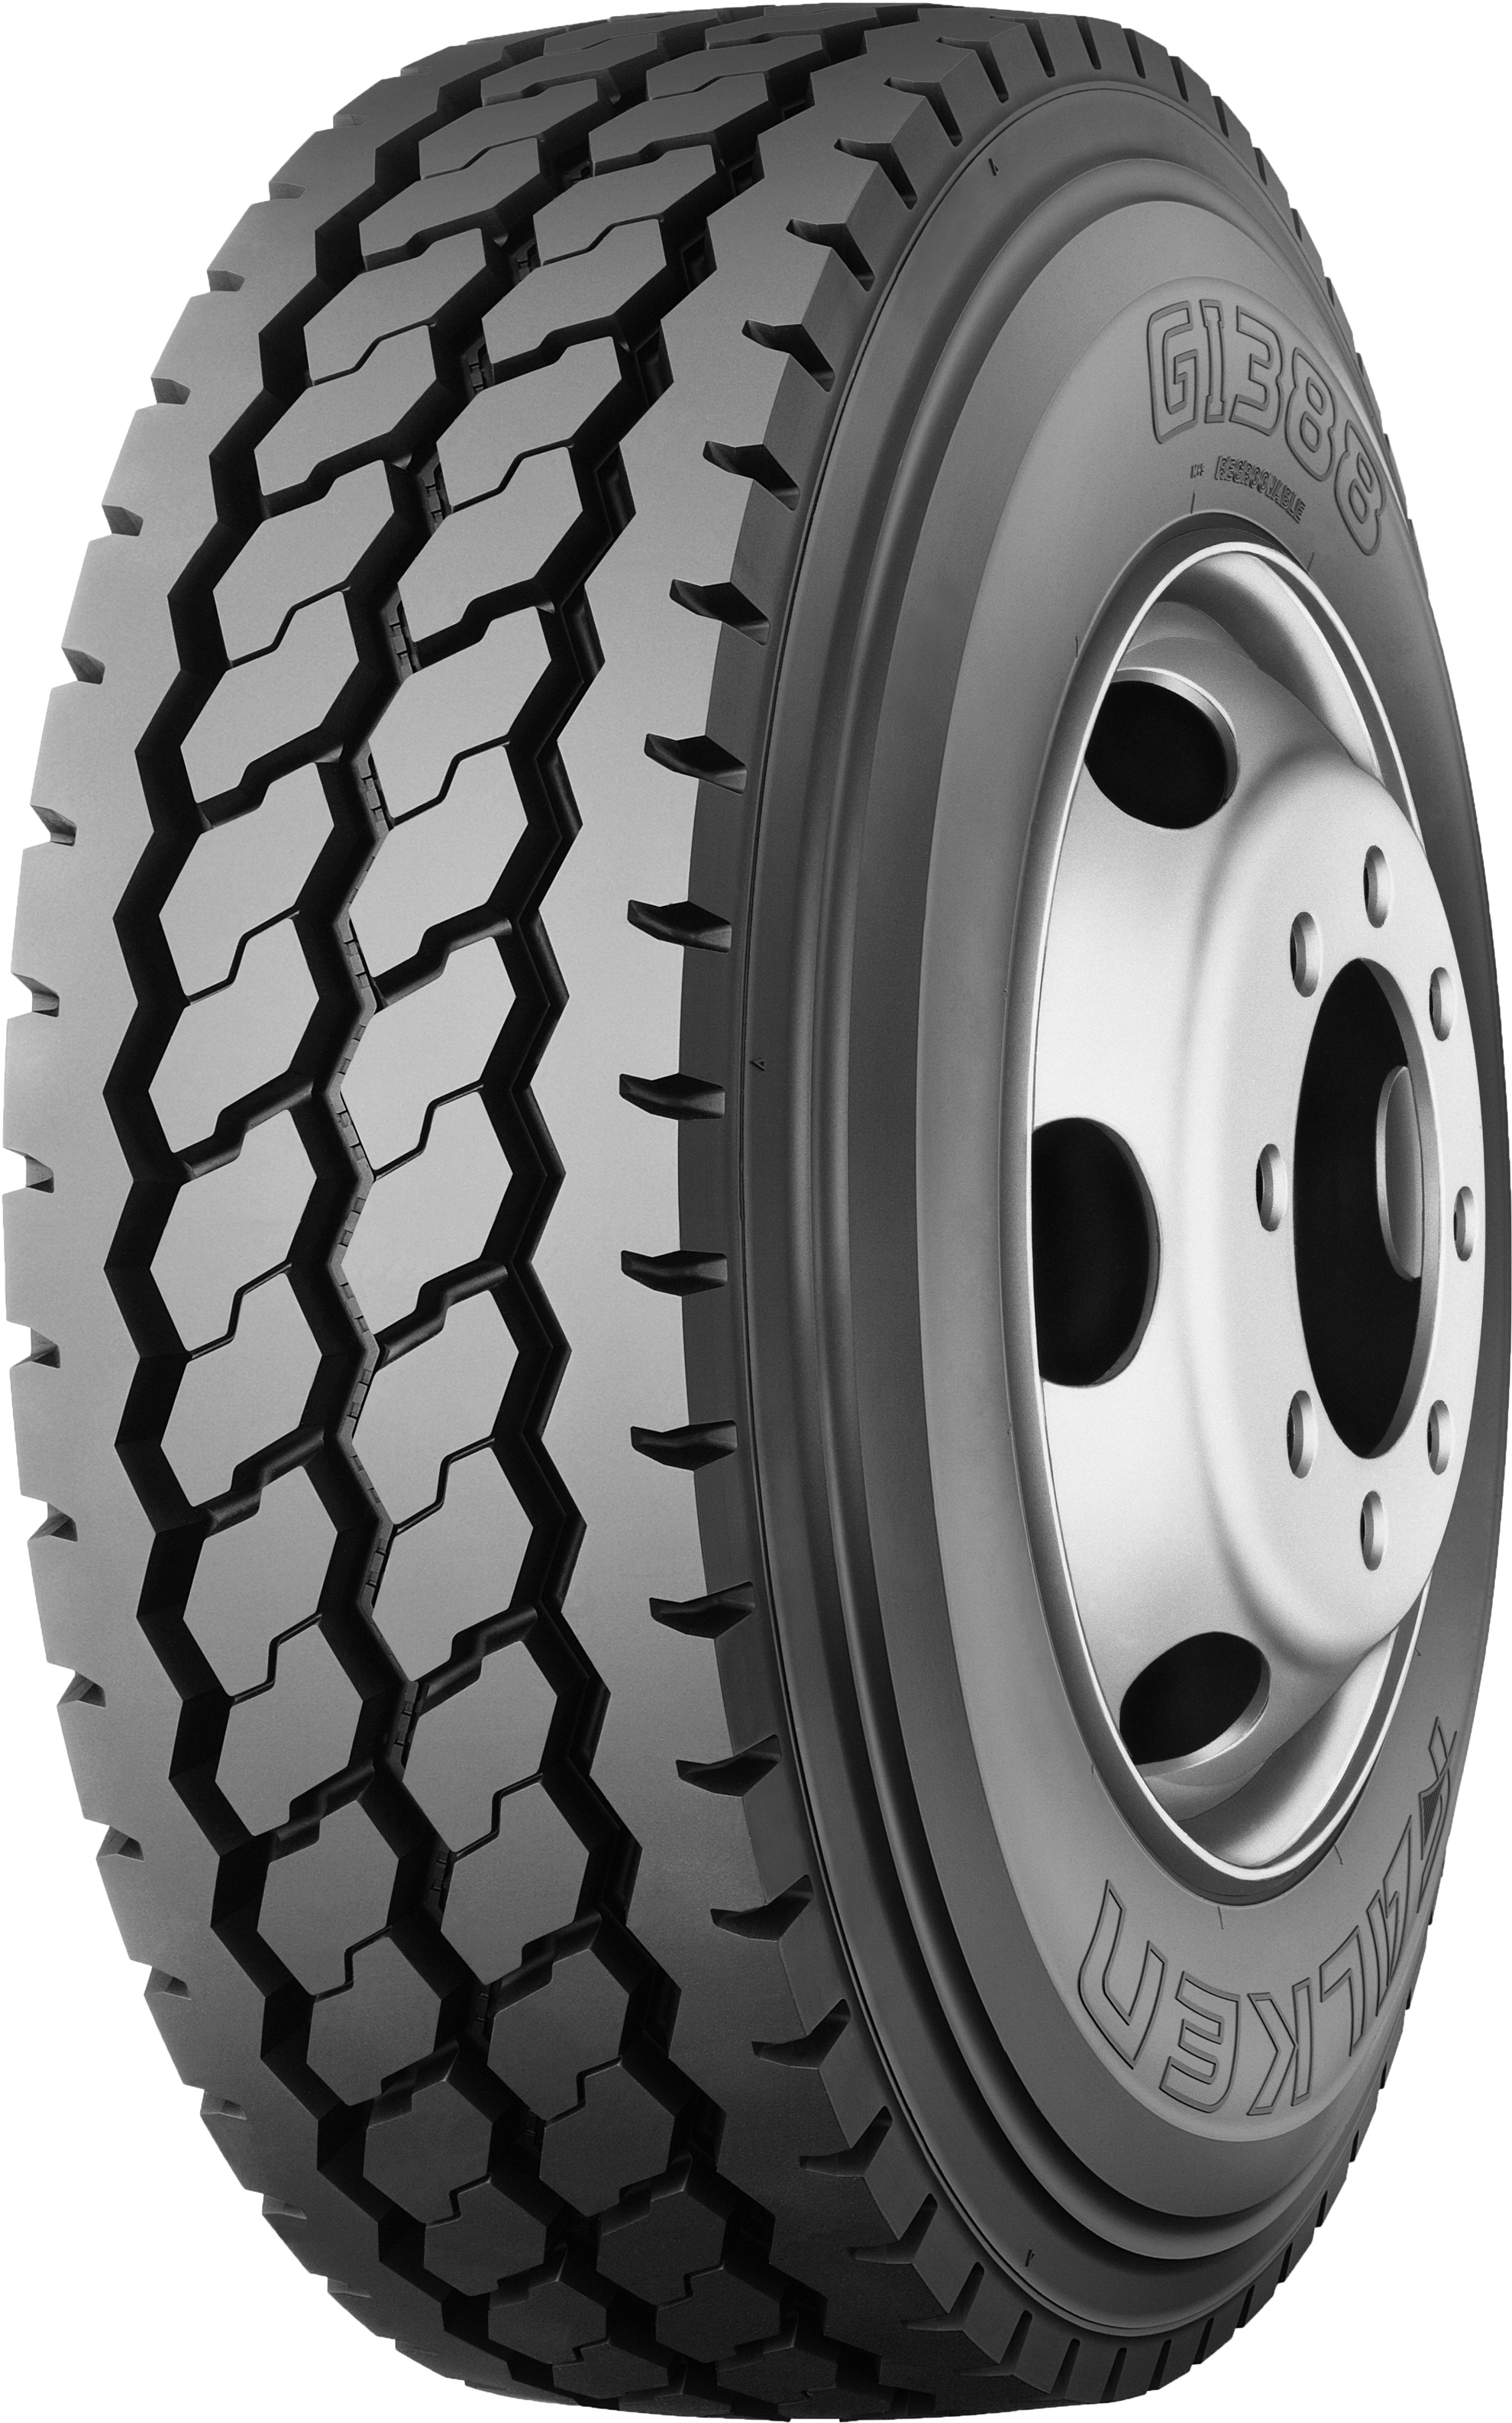 Falken’s latest on/off-road truck tyres help mixed use operators keep costs on track